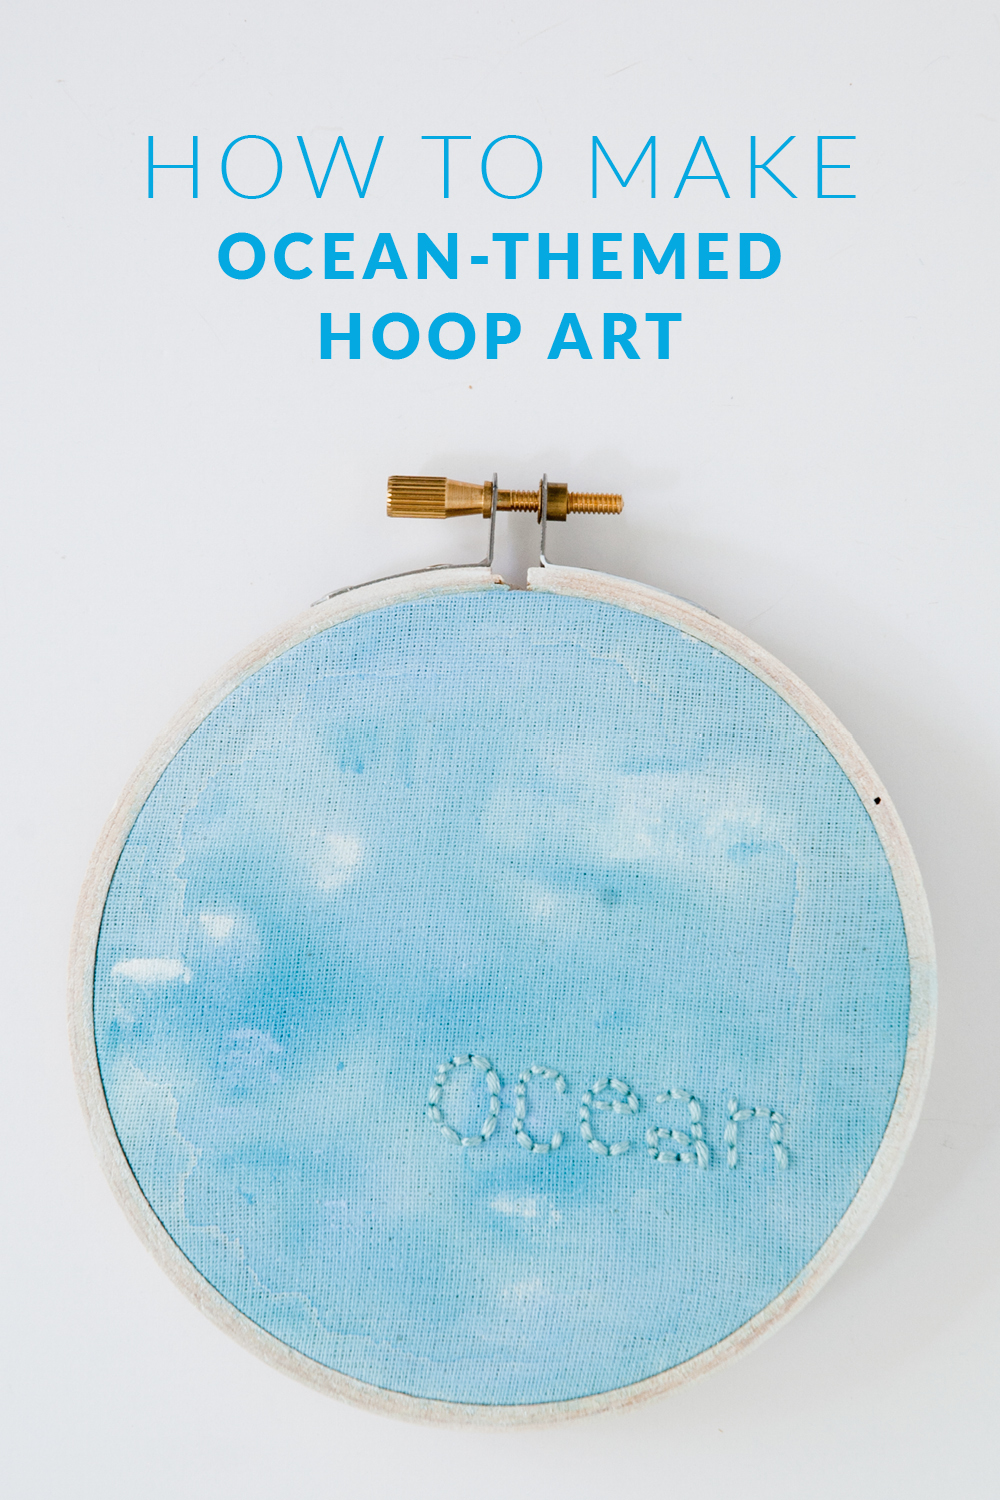 How to Make Ocean-Themed Hoop Art - Whip up this simple craft in an afternoon for your own home or the ocean-lover in your life. Makes a great Christmas, Mother's Day, or birthday gift! @ littlegirldesigns.com